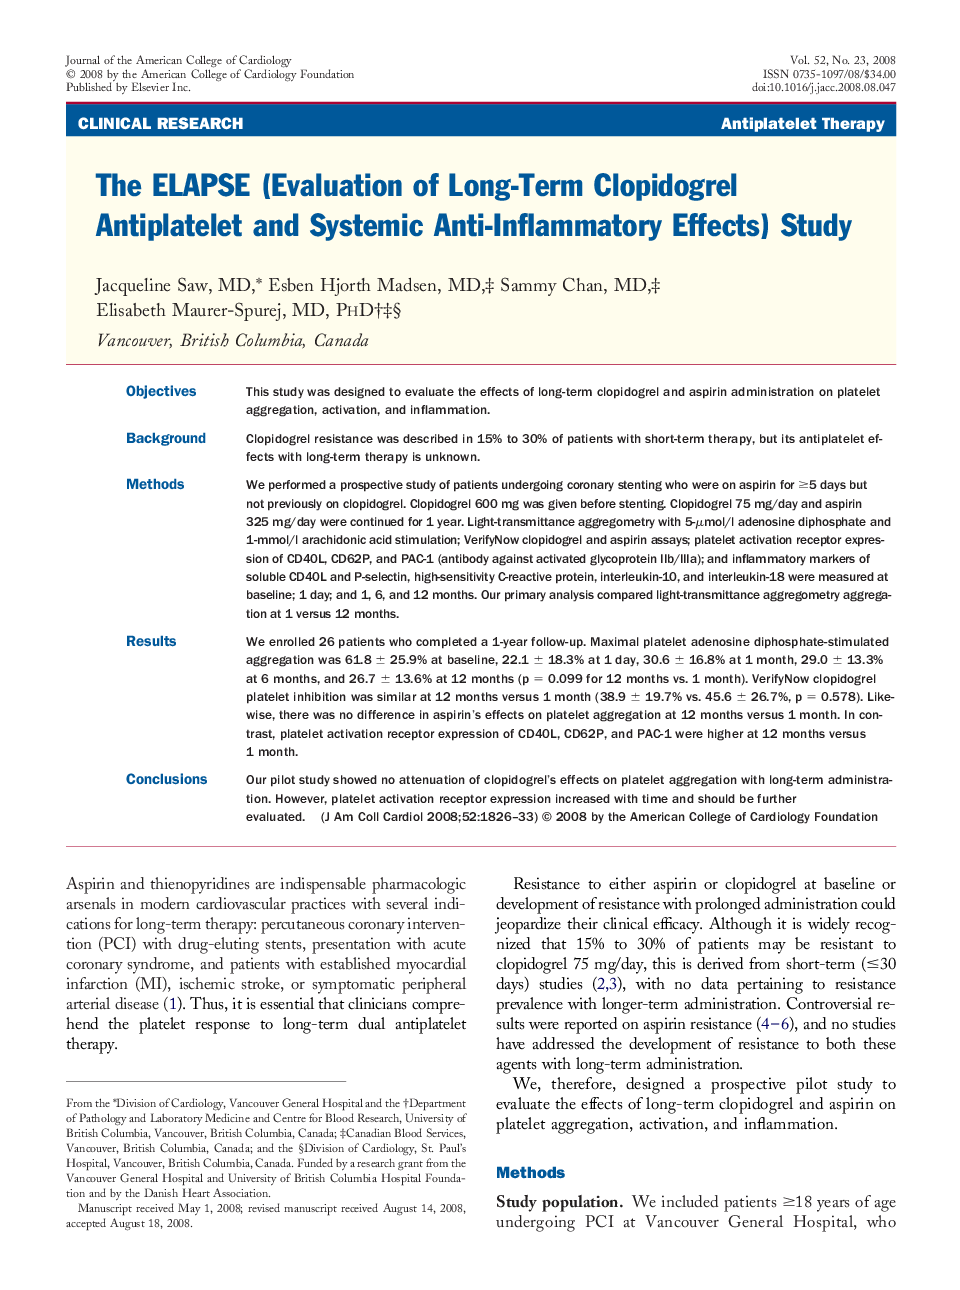 The ELAPSE (Evaluation of Long-Term Clopidogrel Antiplatelet and Systemic Anti-Inflammatory Effects) Study 